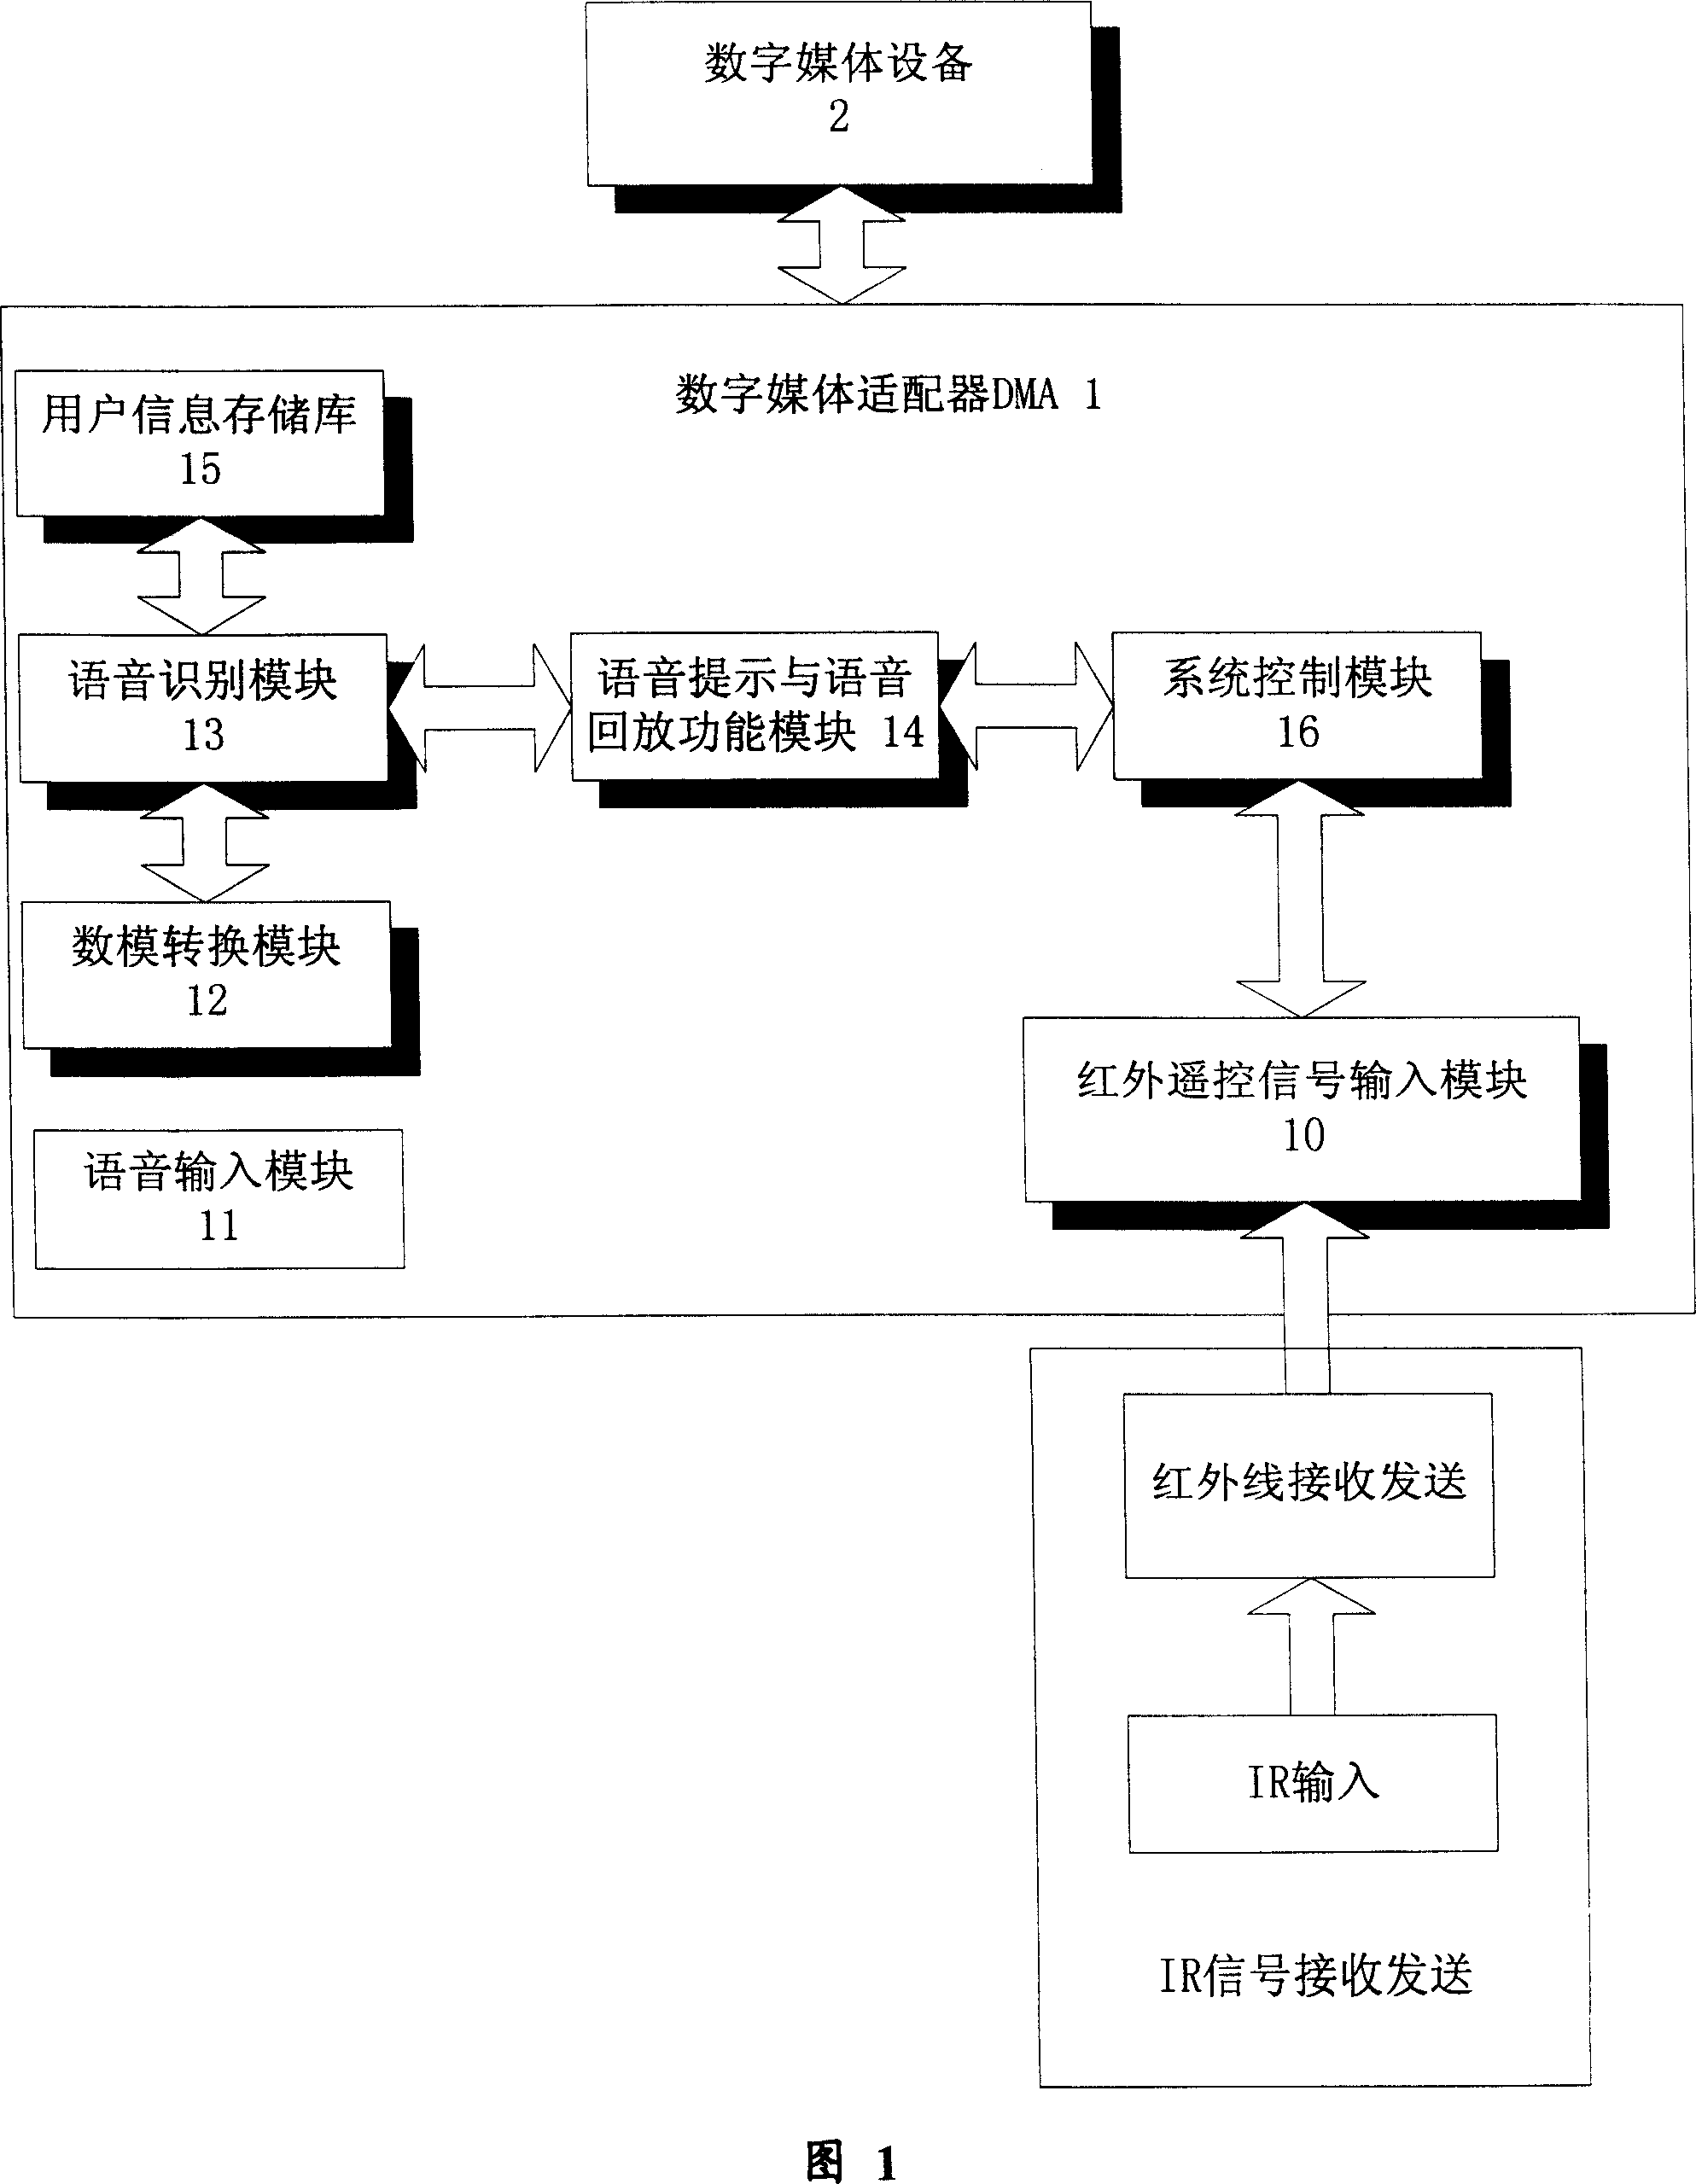 Digital media adaptor with voice control function and its voice control method